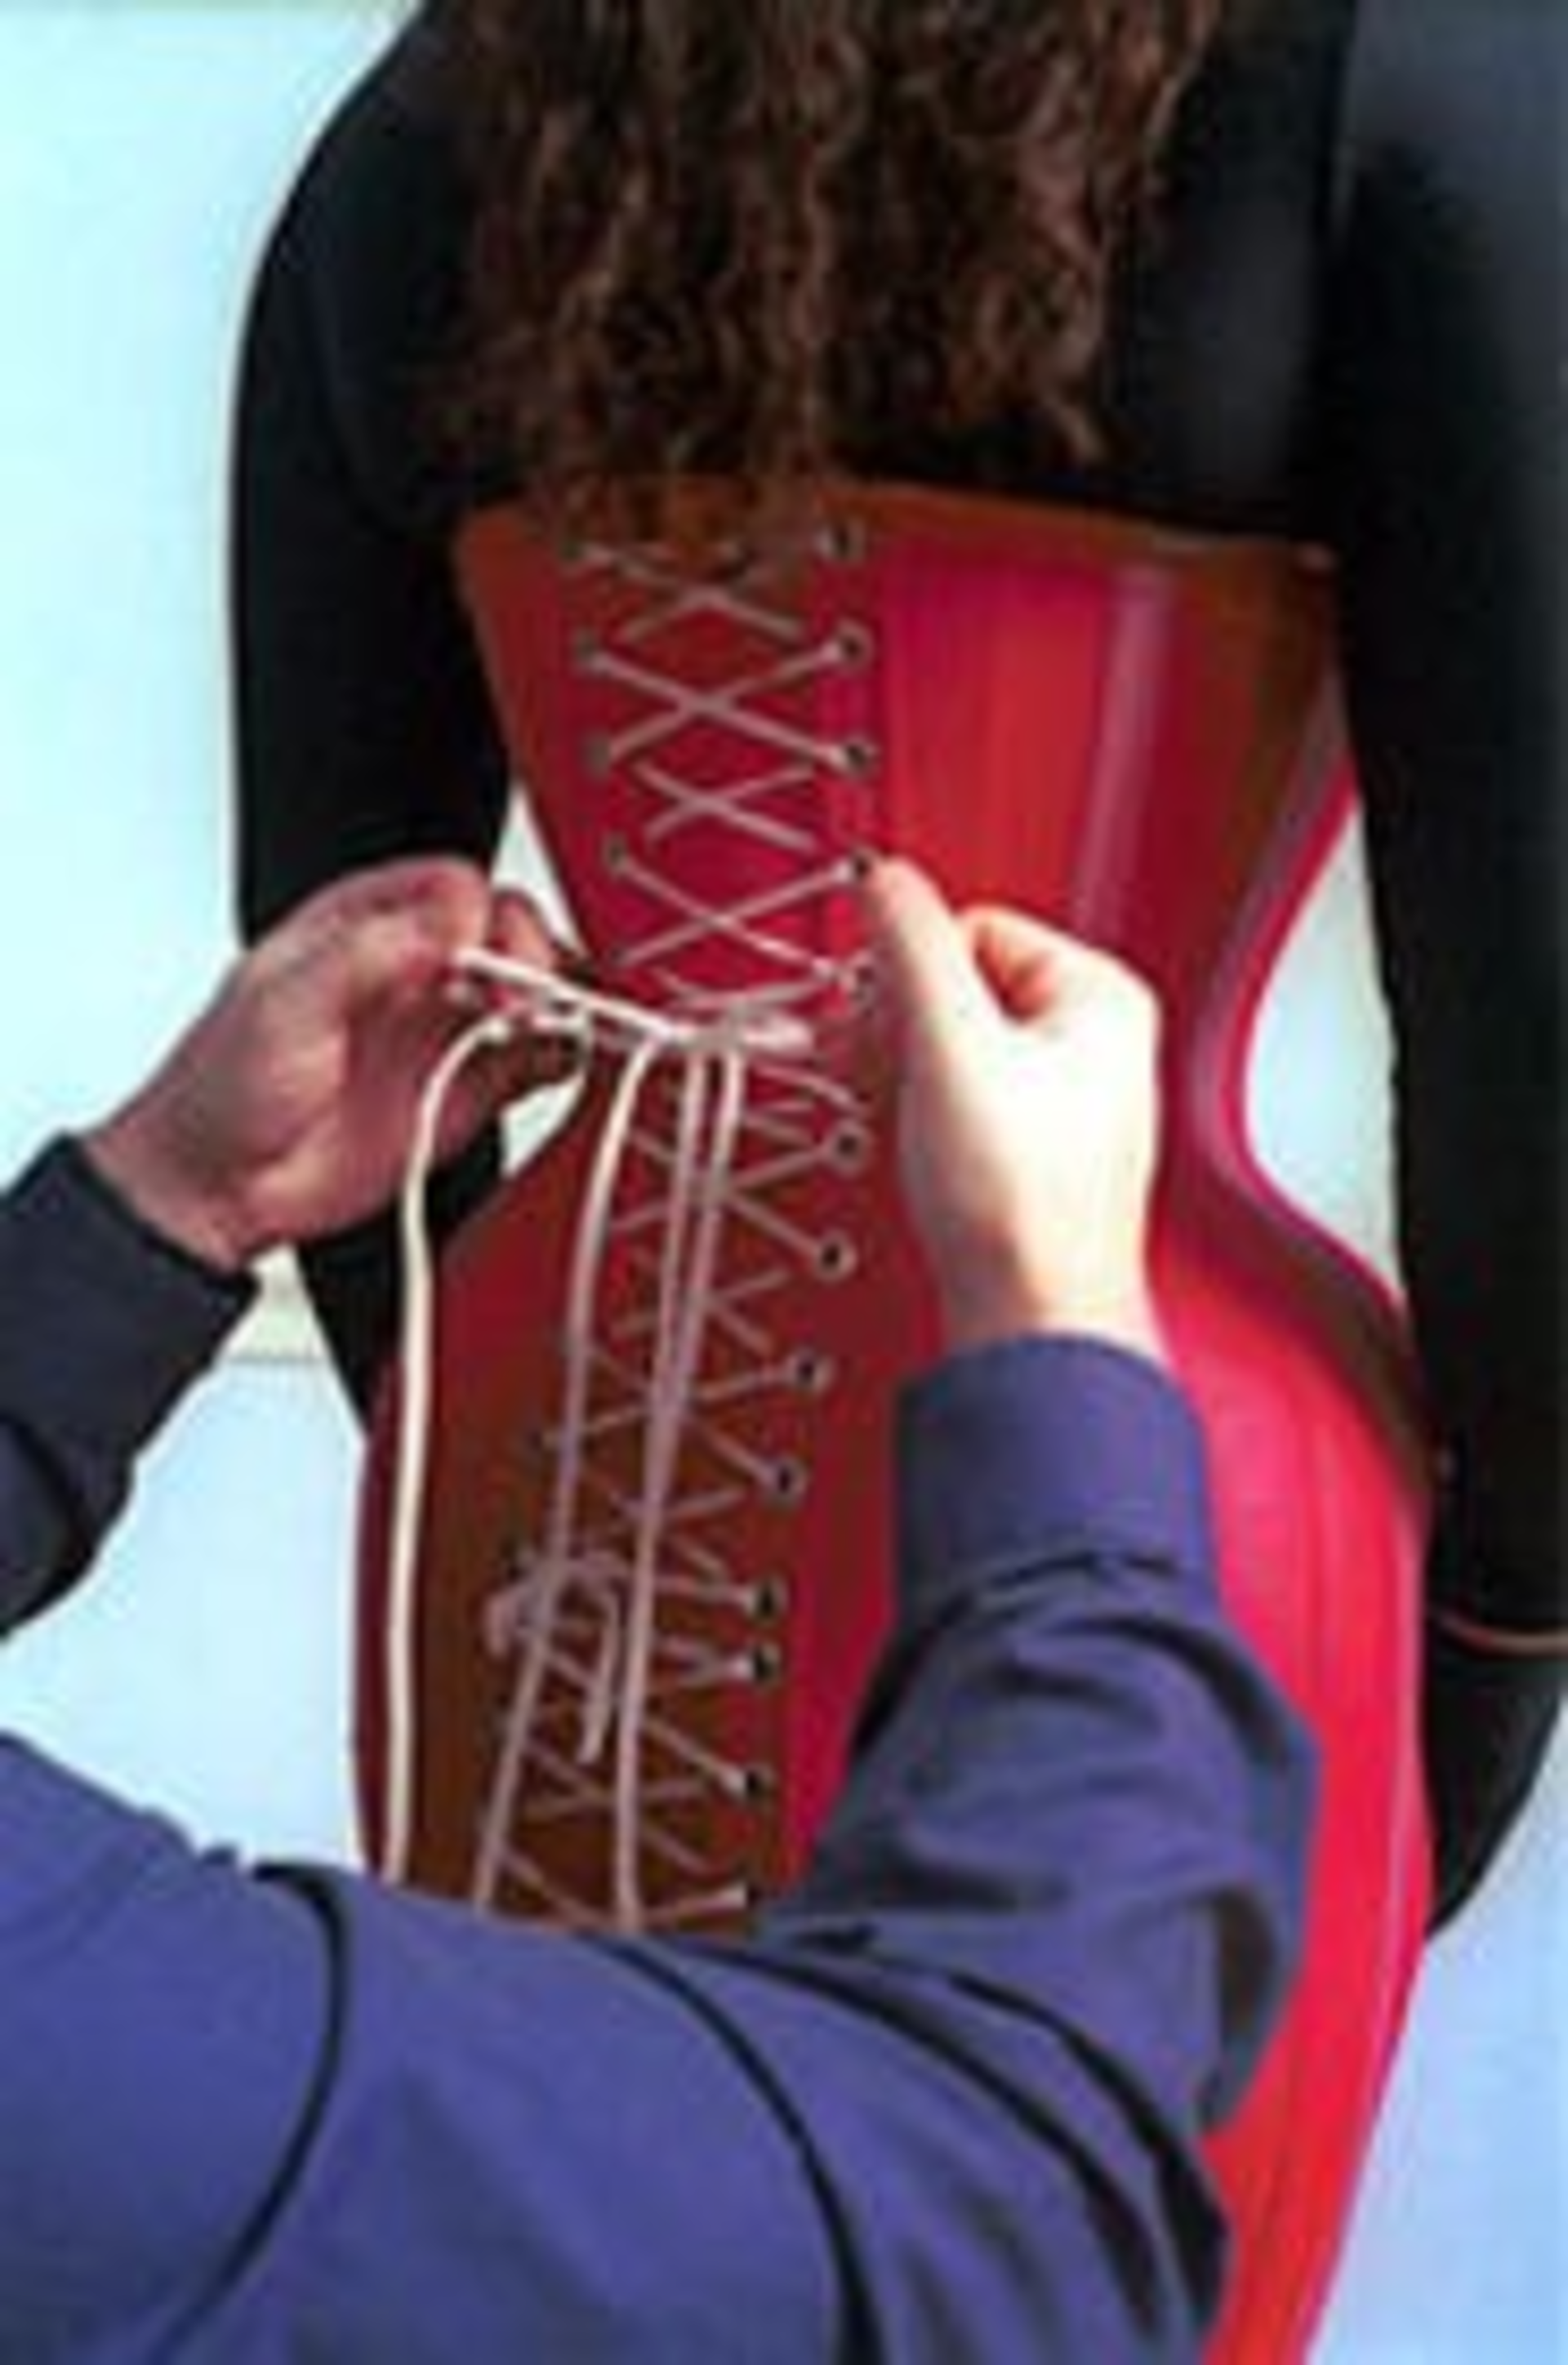 The Corset Controversy: A Tight-Laced Dance Between Fashion